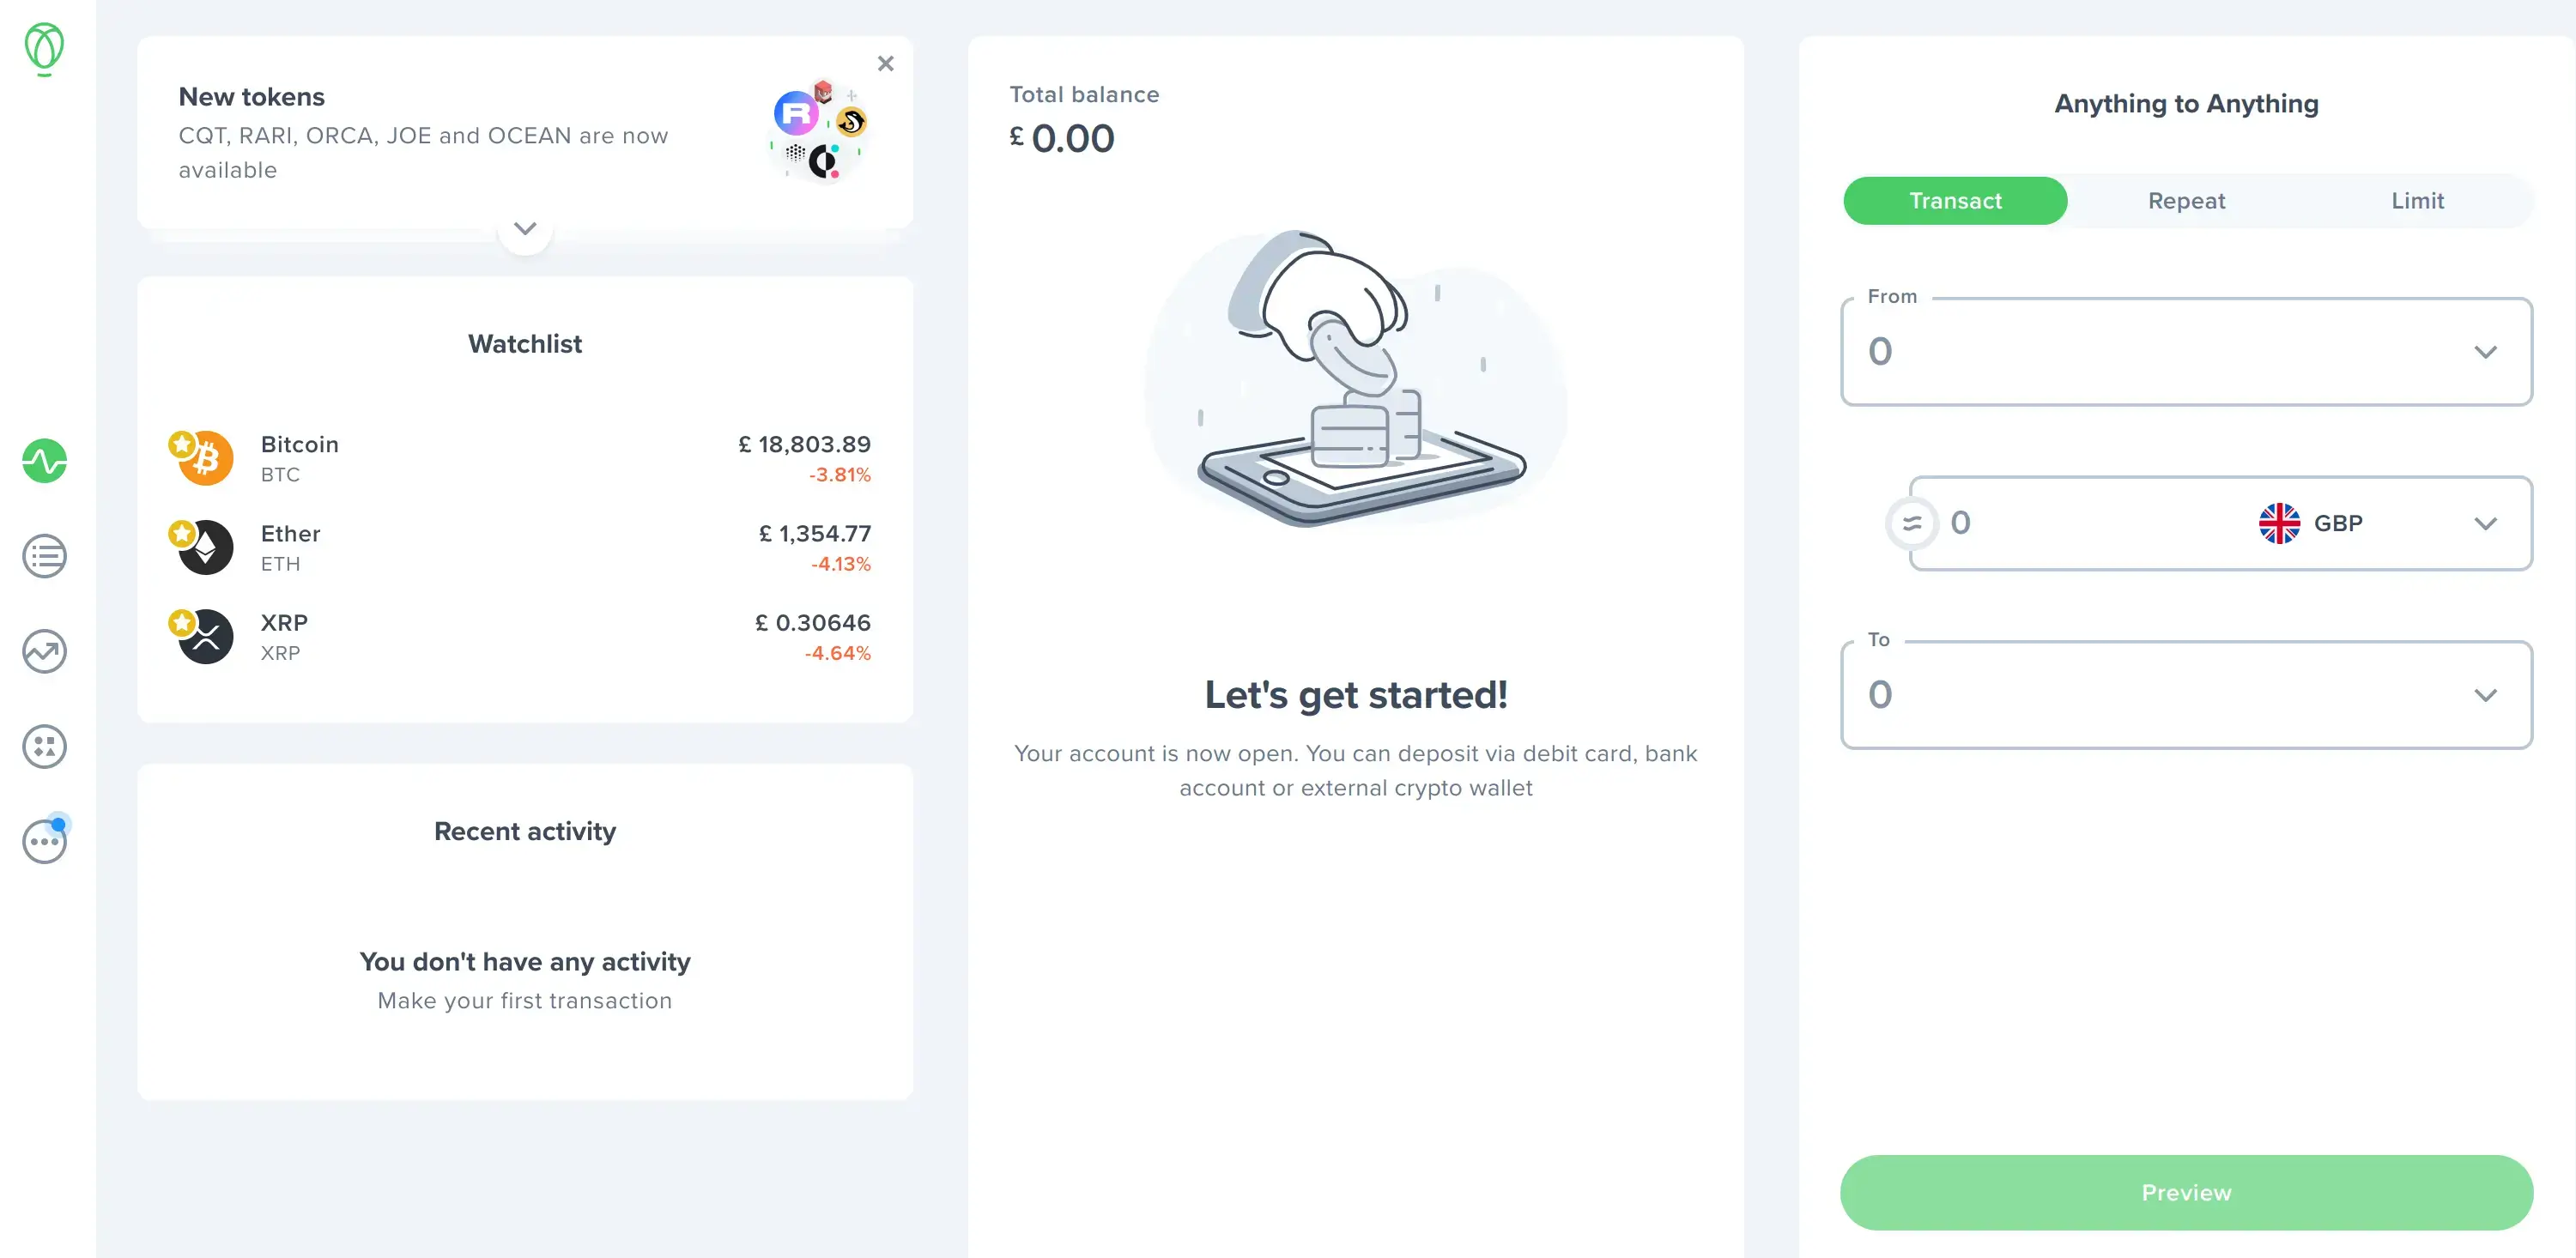 screenshot of the dashboard of uphold with a balance of £0